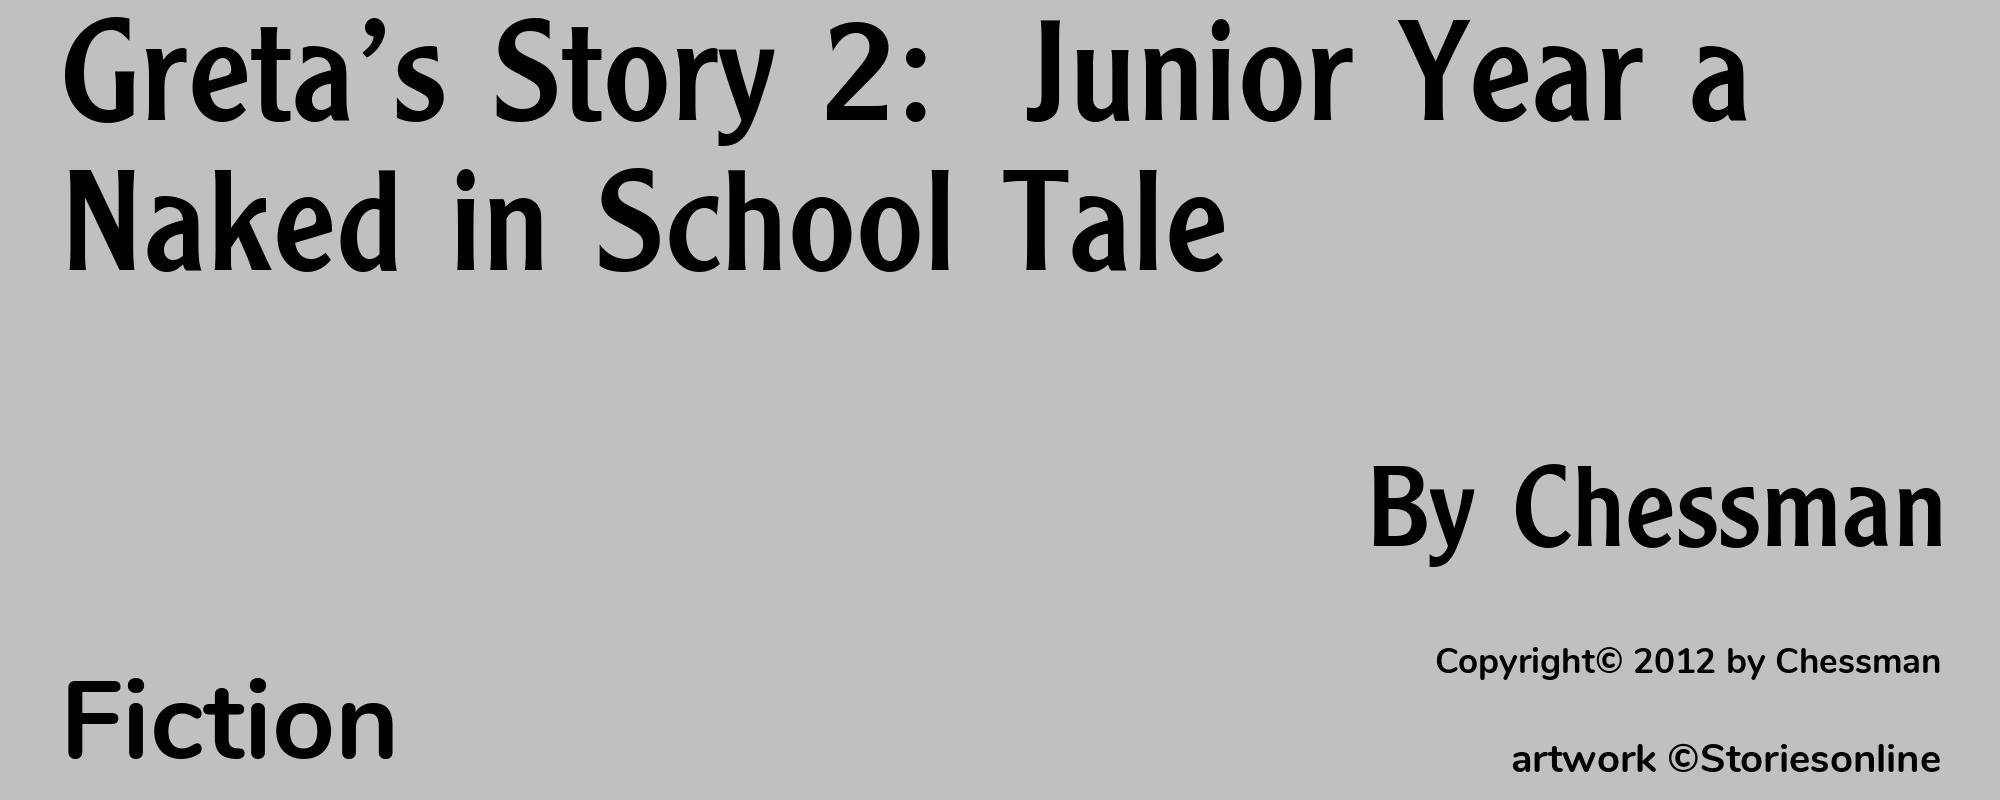 Greta’s Story 2:  Junior Year a Naked in School Tale - Cover